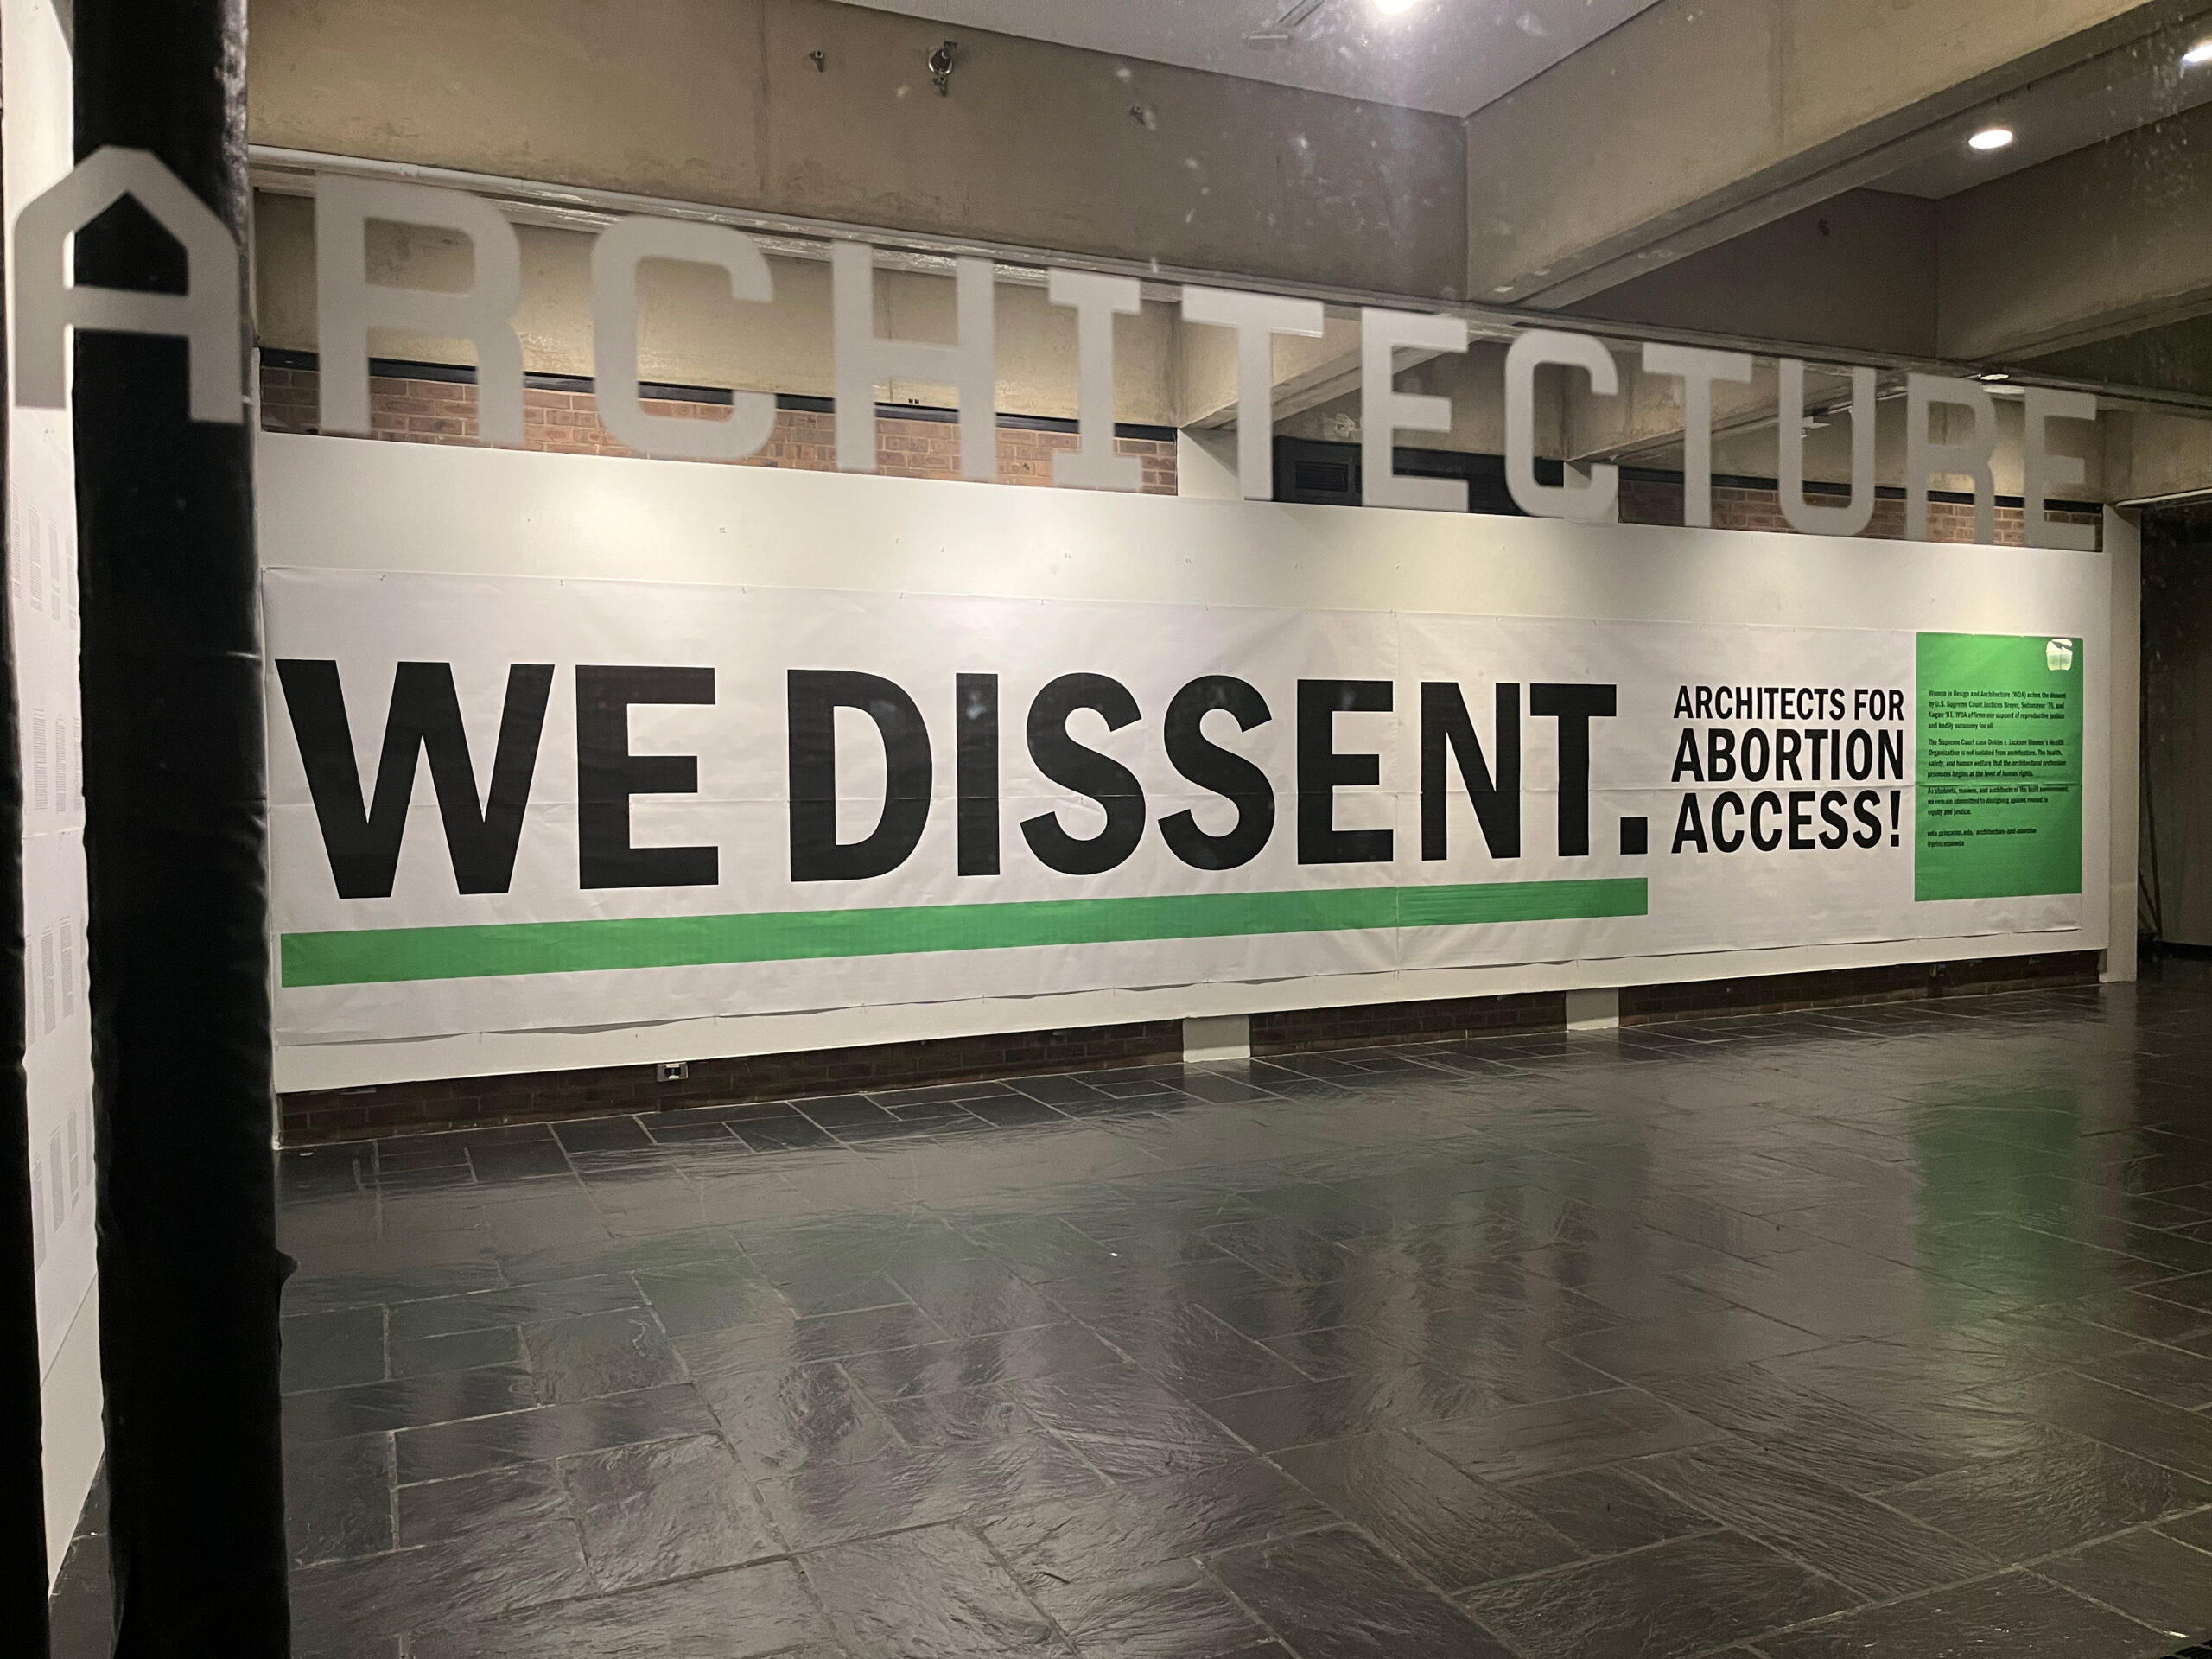 Big text reads "We Dissent Architects for Abortion Access!"